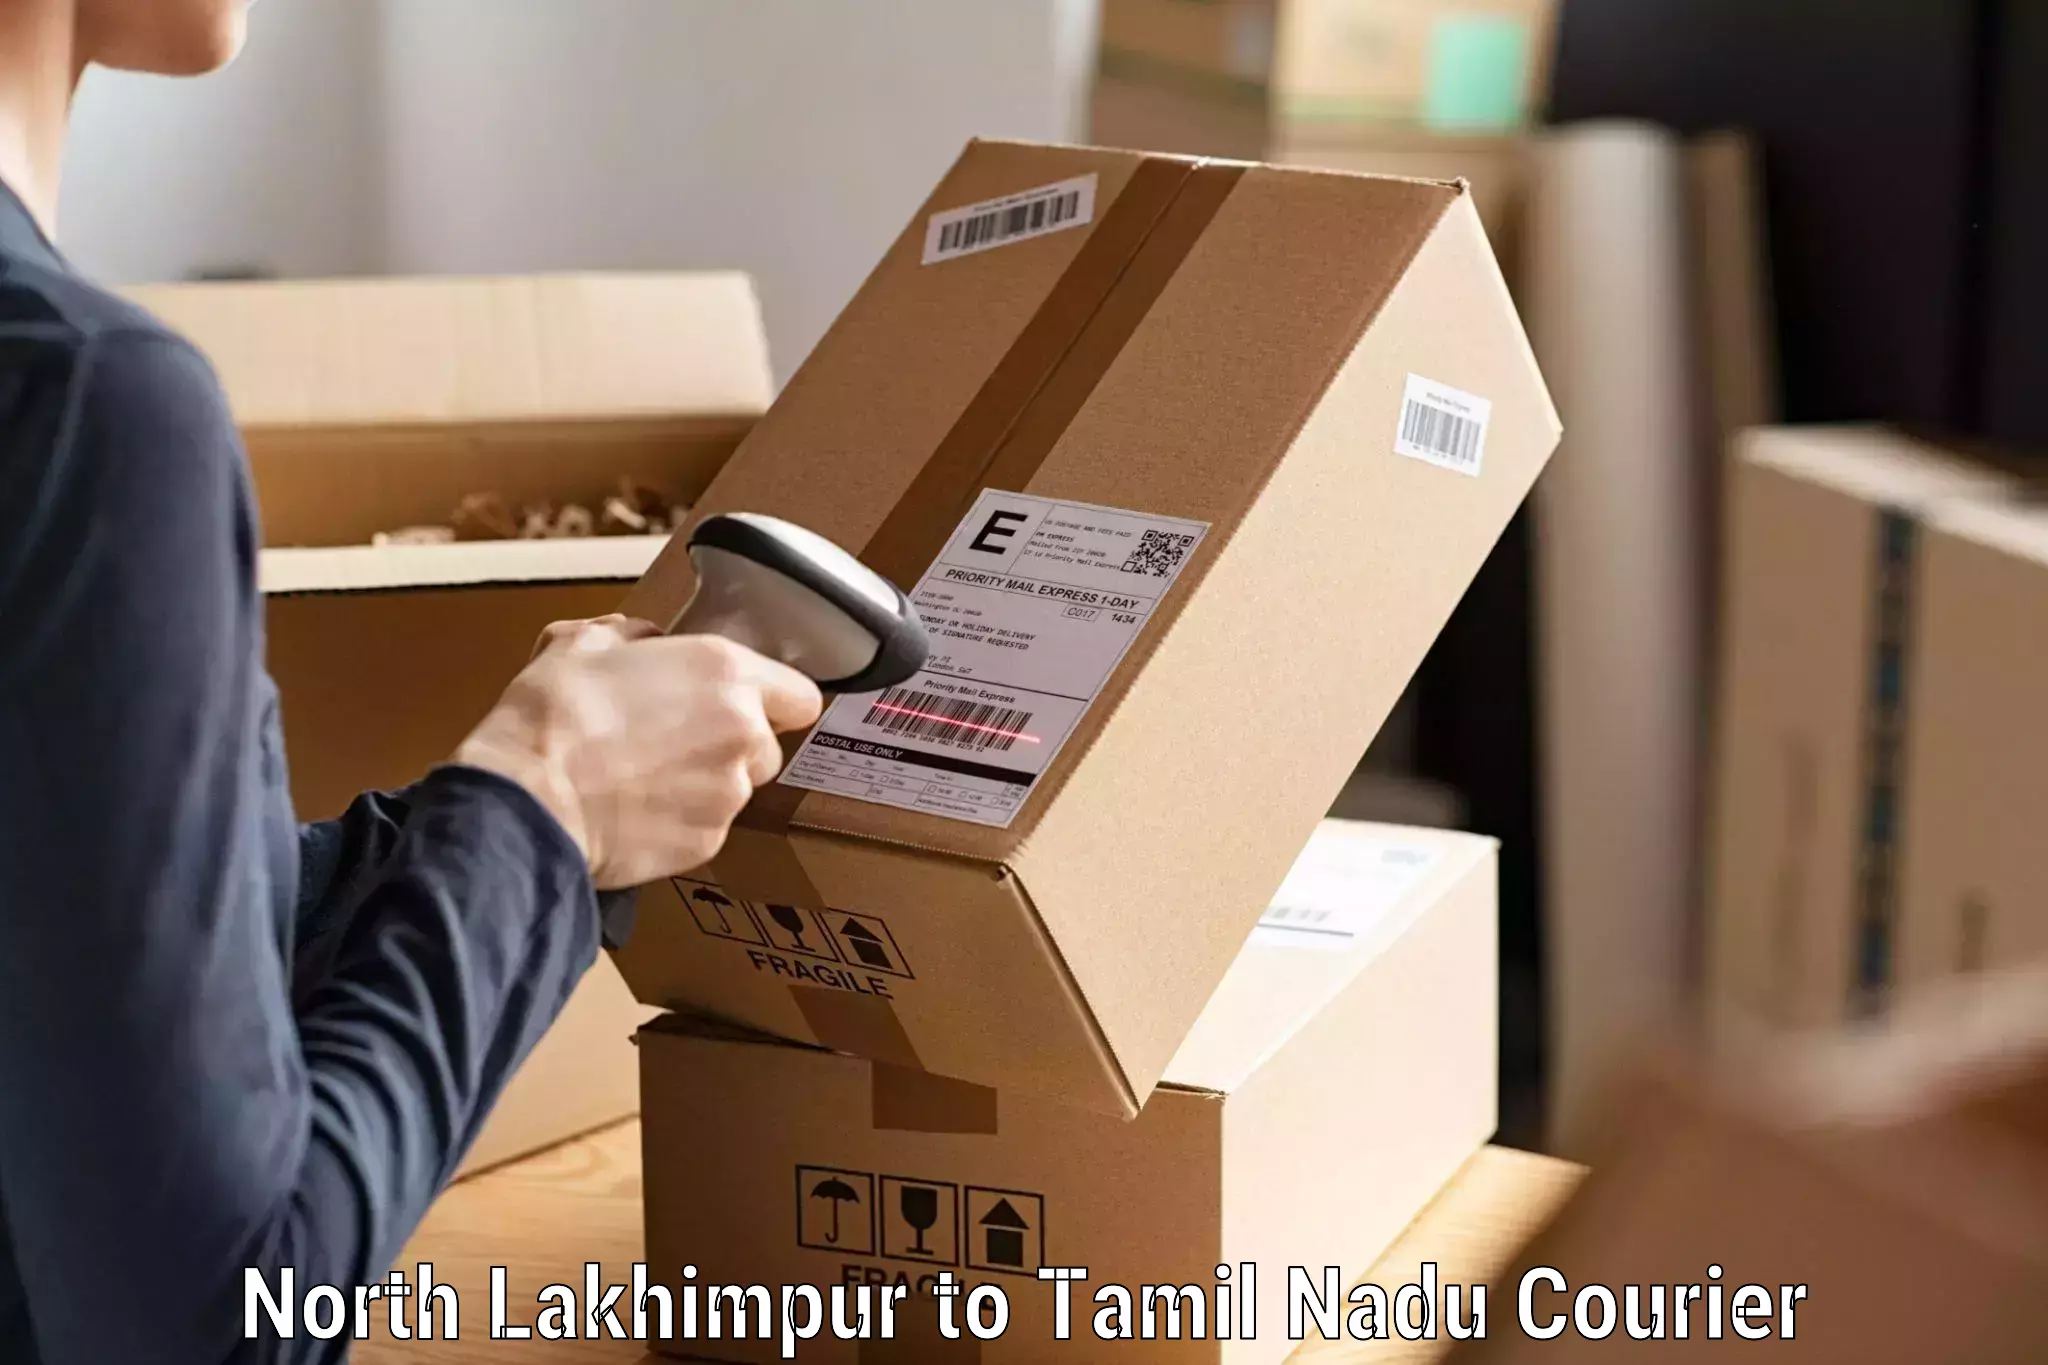 Integrated courier services North Lakhimpur to Tamil Nadu Agricultural University Coimbatore